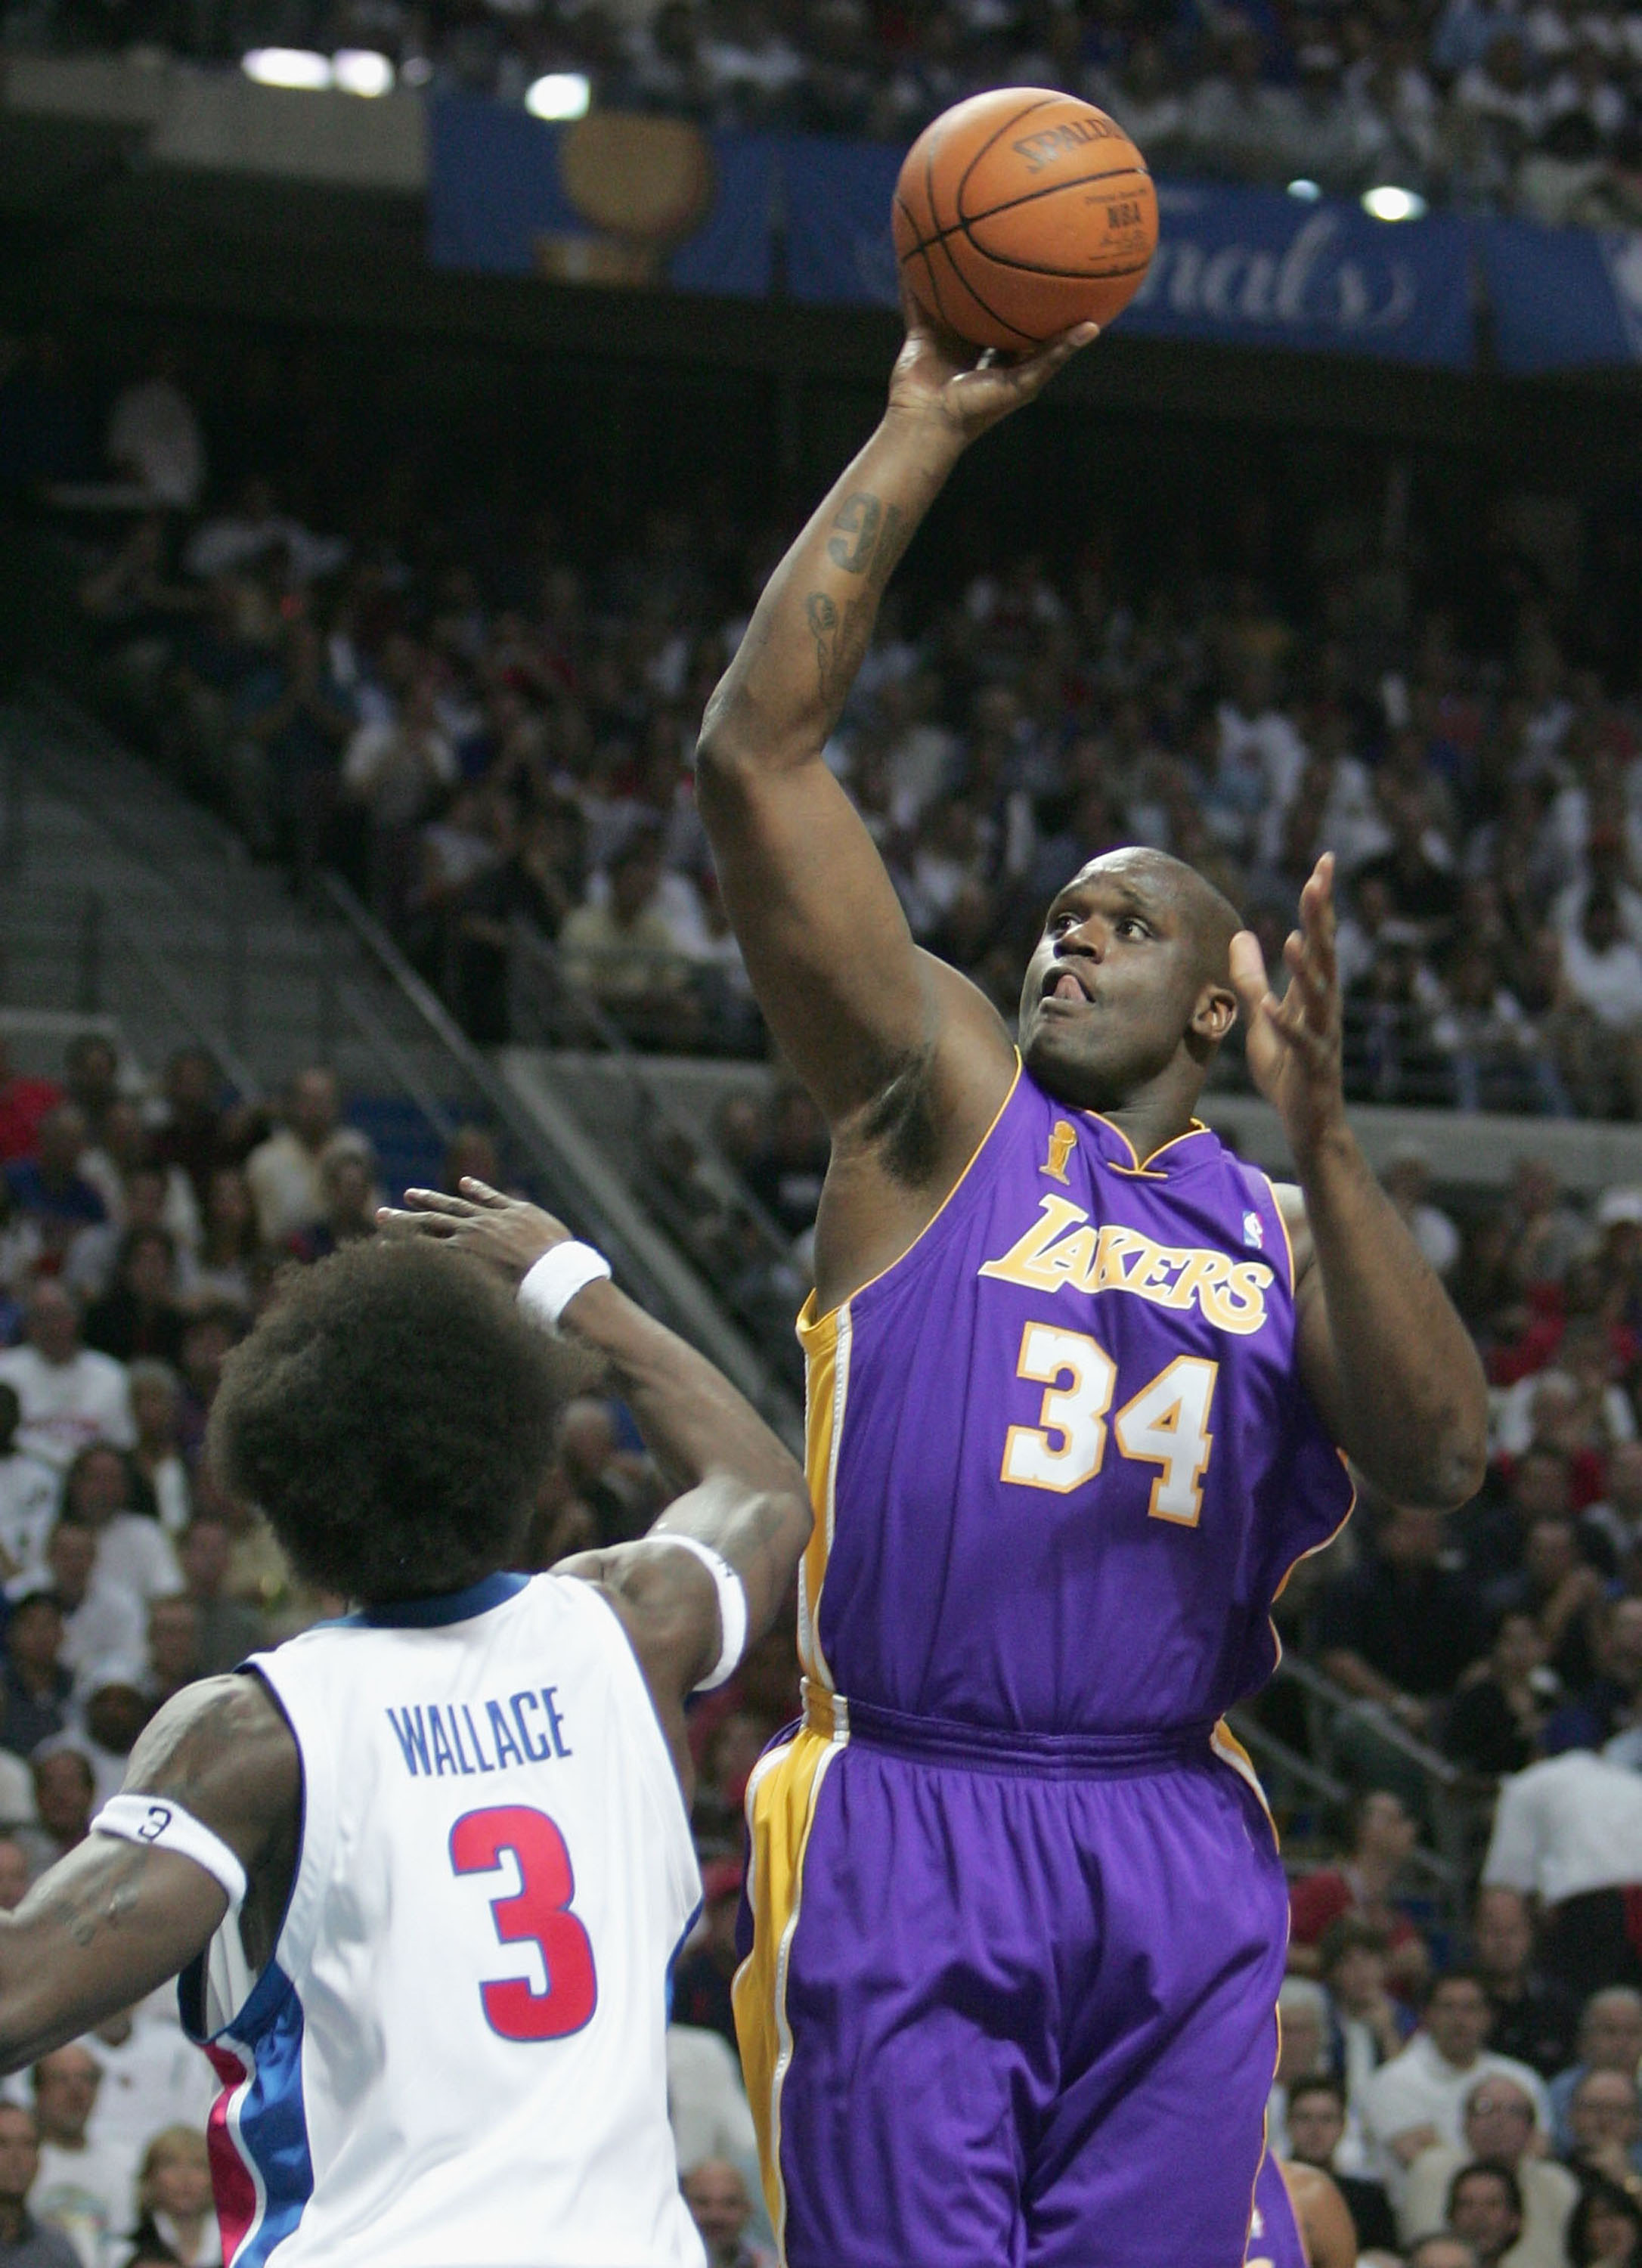 AUBURN HILLS, MI - JUNE 15:  Shaquille O'Neal #34 of the Los Angeles Lakers shoots over Ben Wallace #3 of the Detroit Pistons in the first quarter of game five of the 2004 NBA Finals on June 15, 2004 at The Palace of Auburn Hills in Auburn Hills, Michigan